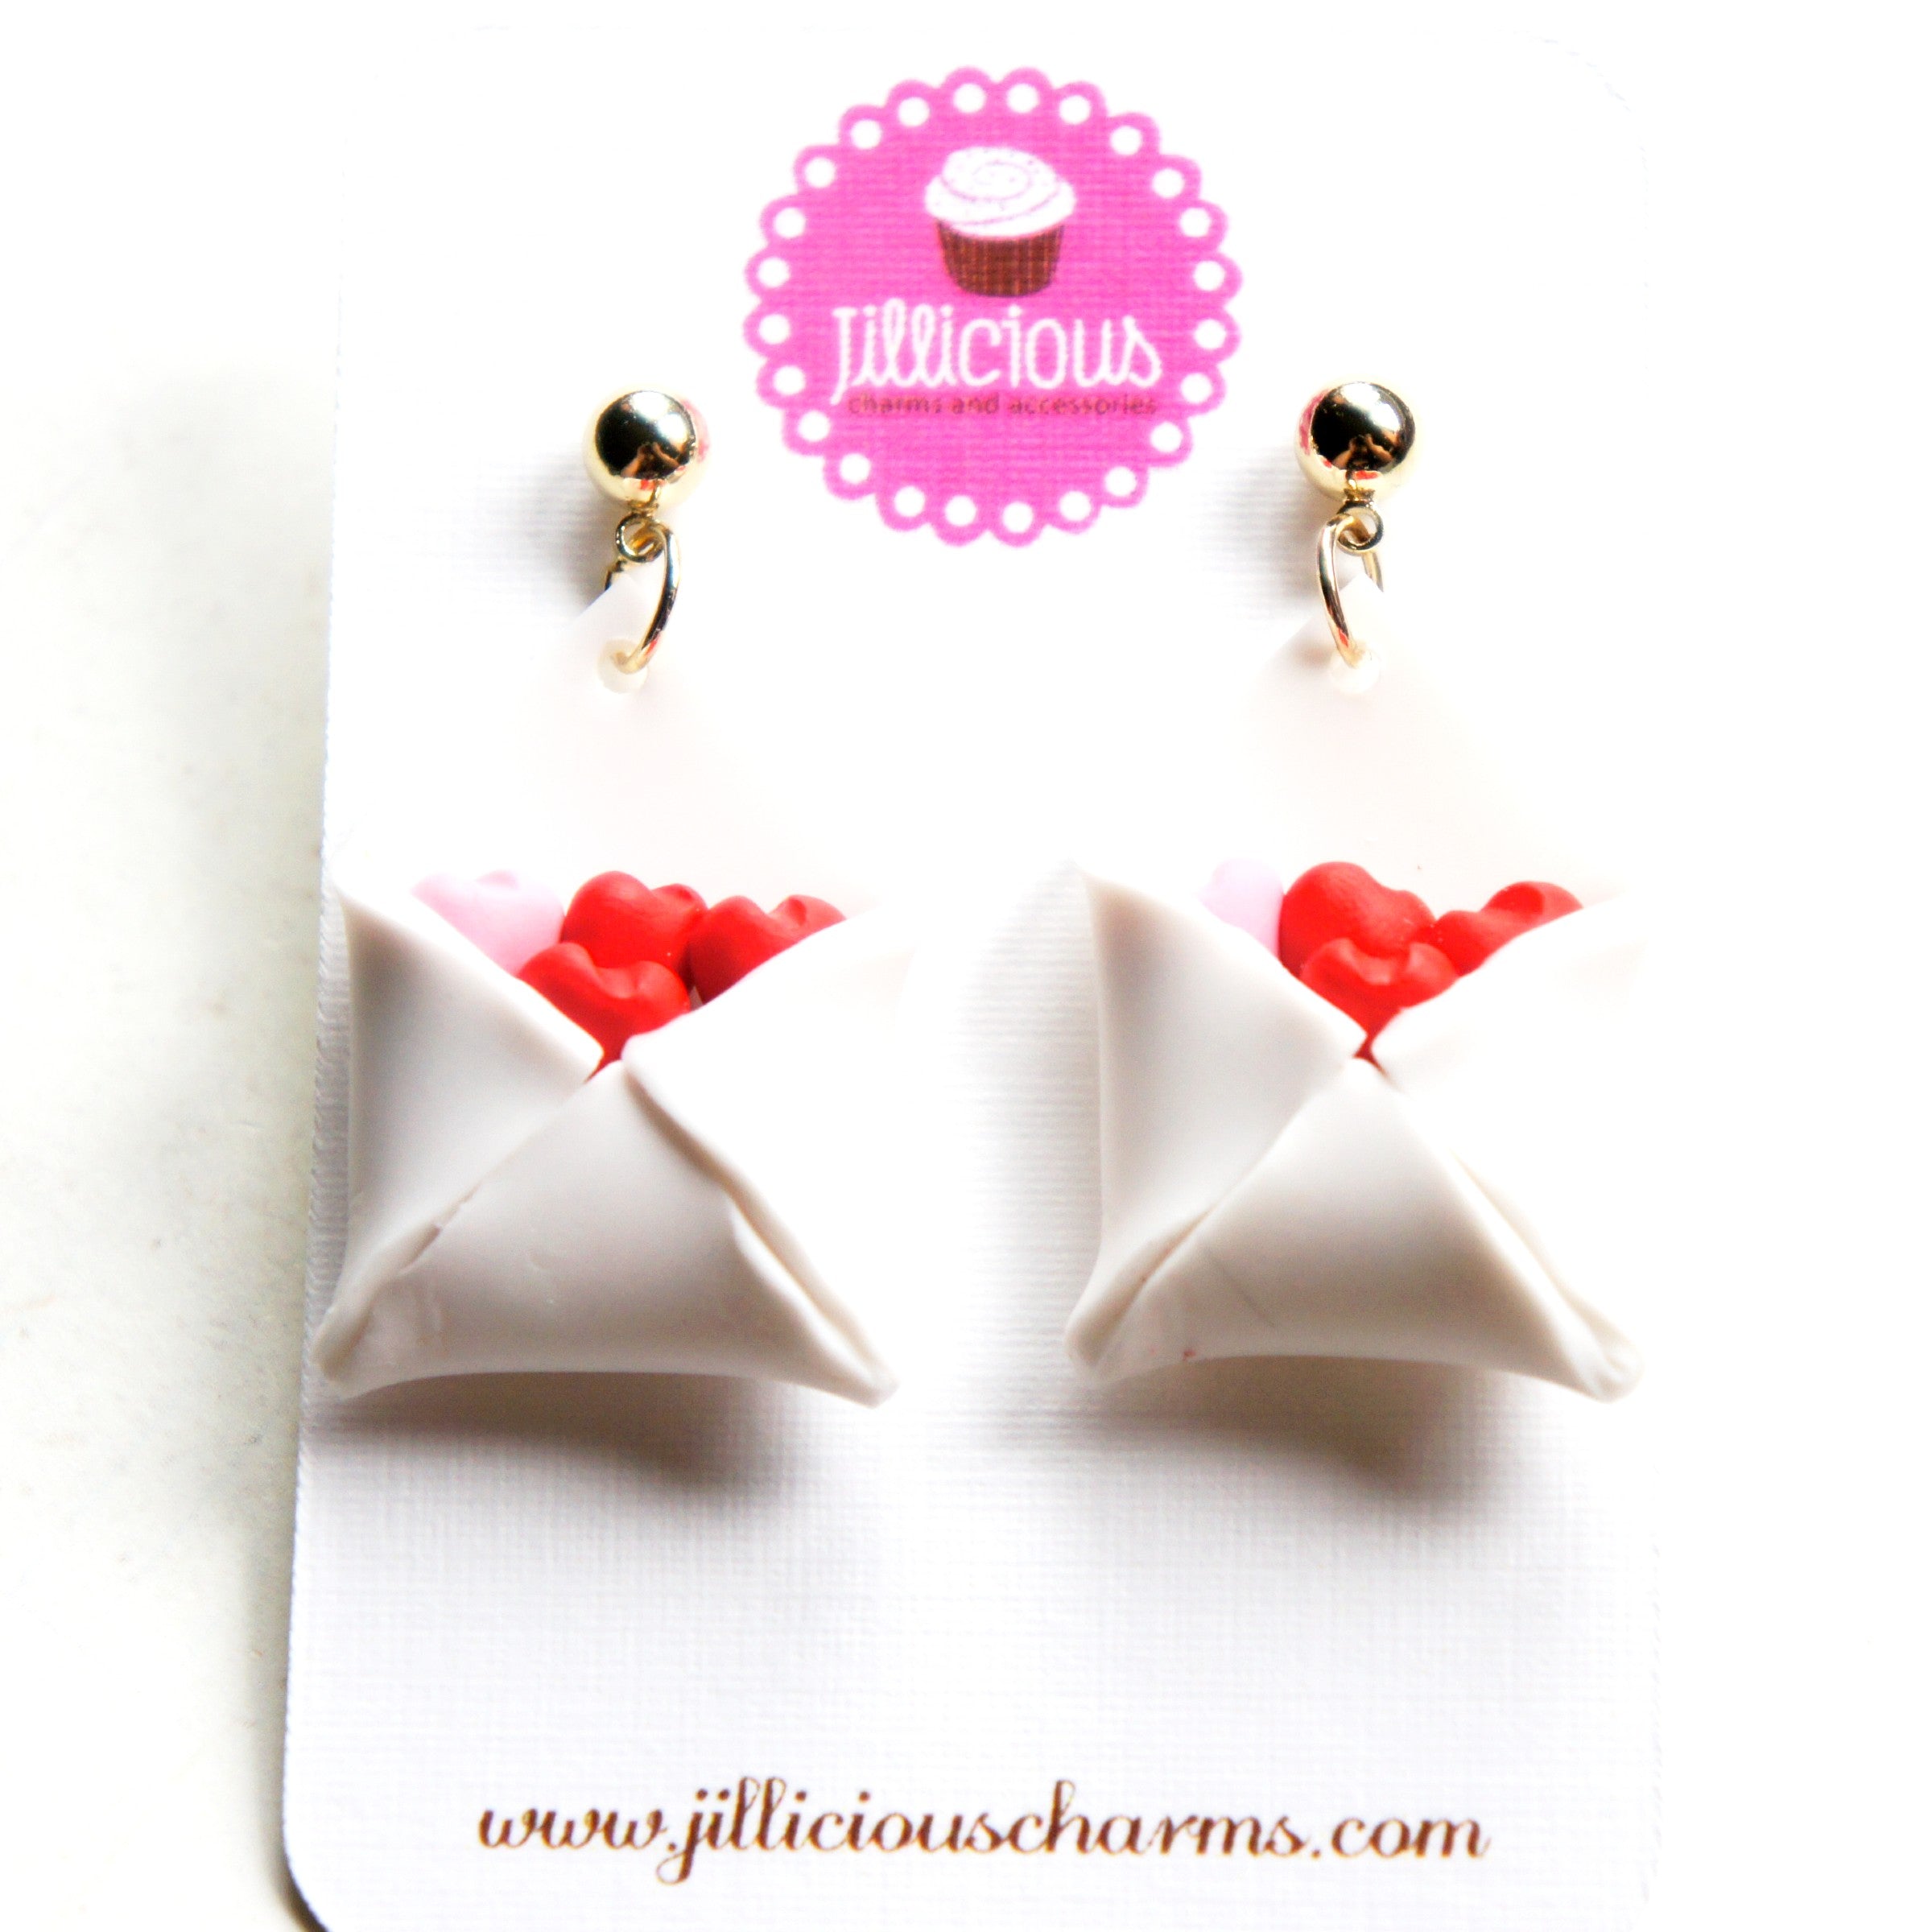 Love Letter Dangle Earrings - Jillicious charms and accessories